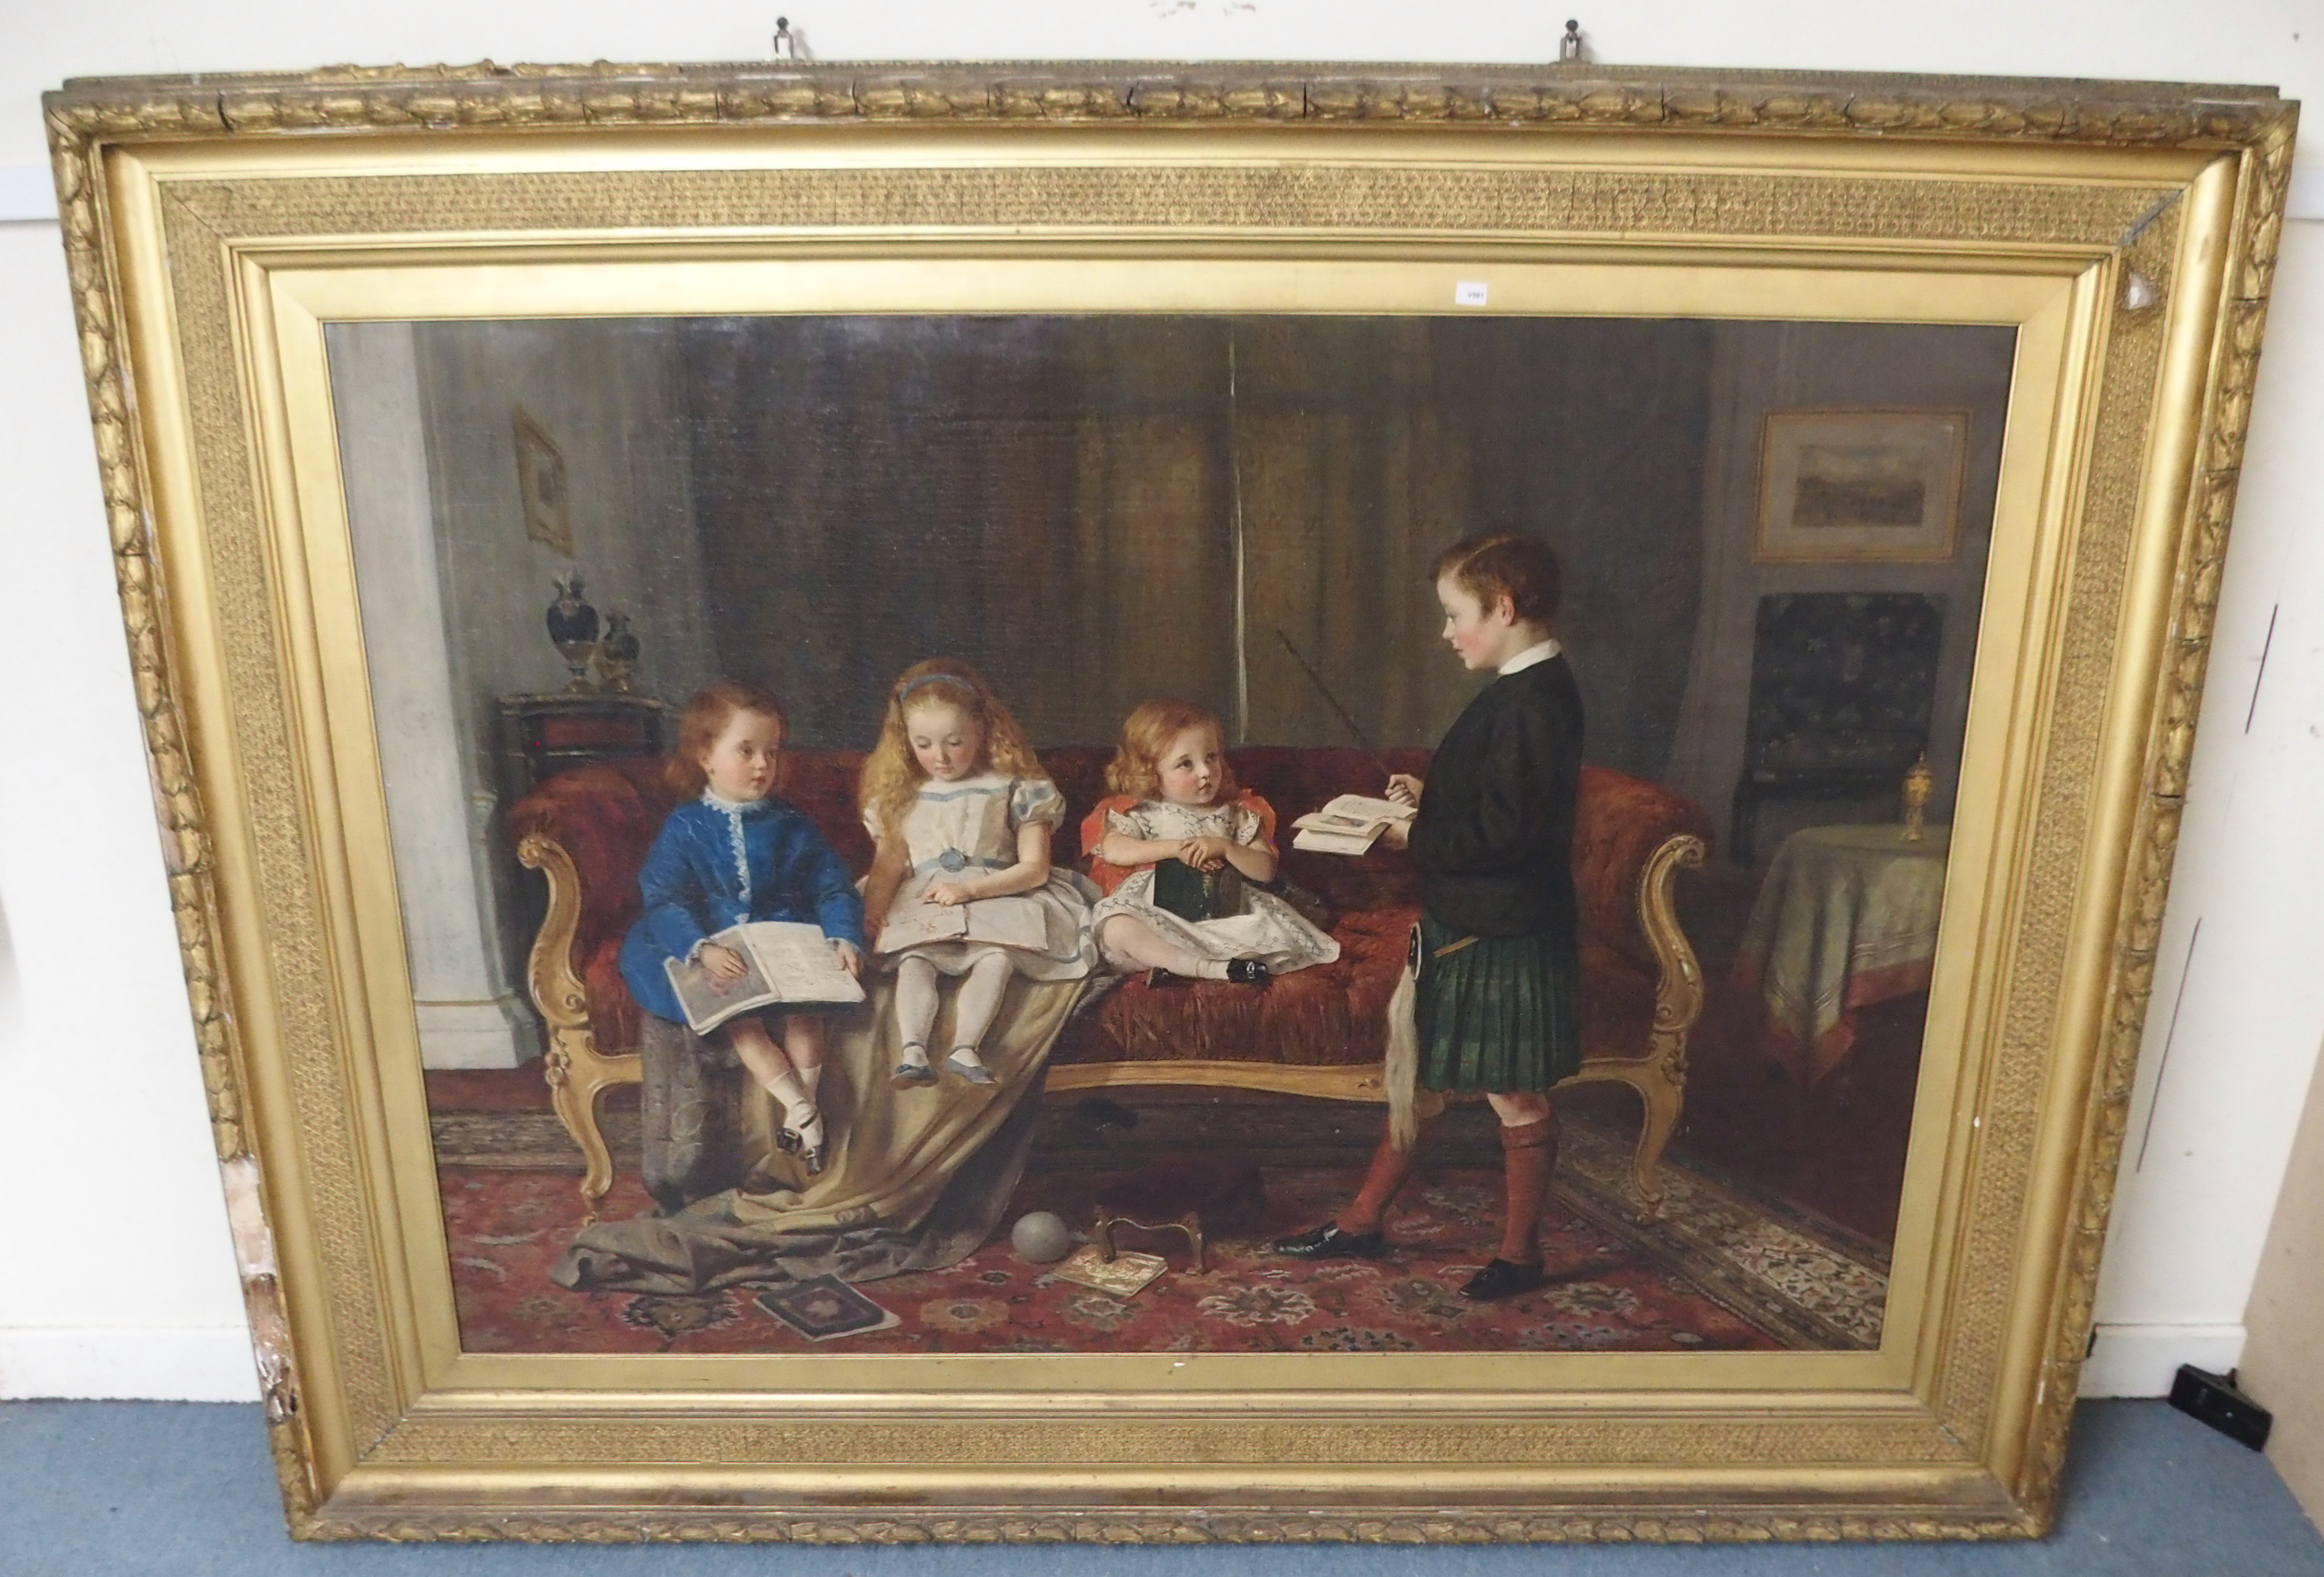 SCOTTISH SCHOOL (19TH CENTURY) THE LESSON C. 1882 Oil on canvas, 96.5 x 138cm (38 x 54 1/4") Group - Image 3 of 4